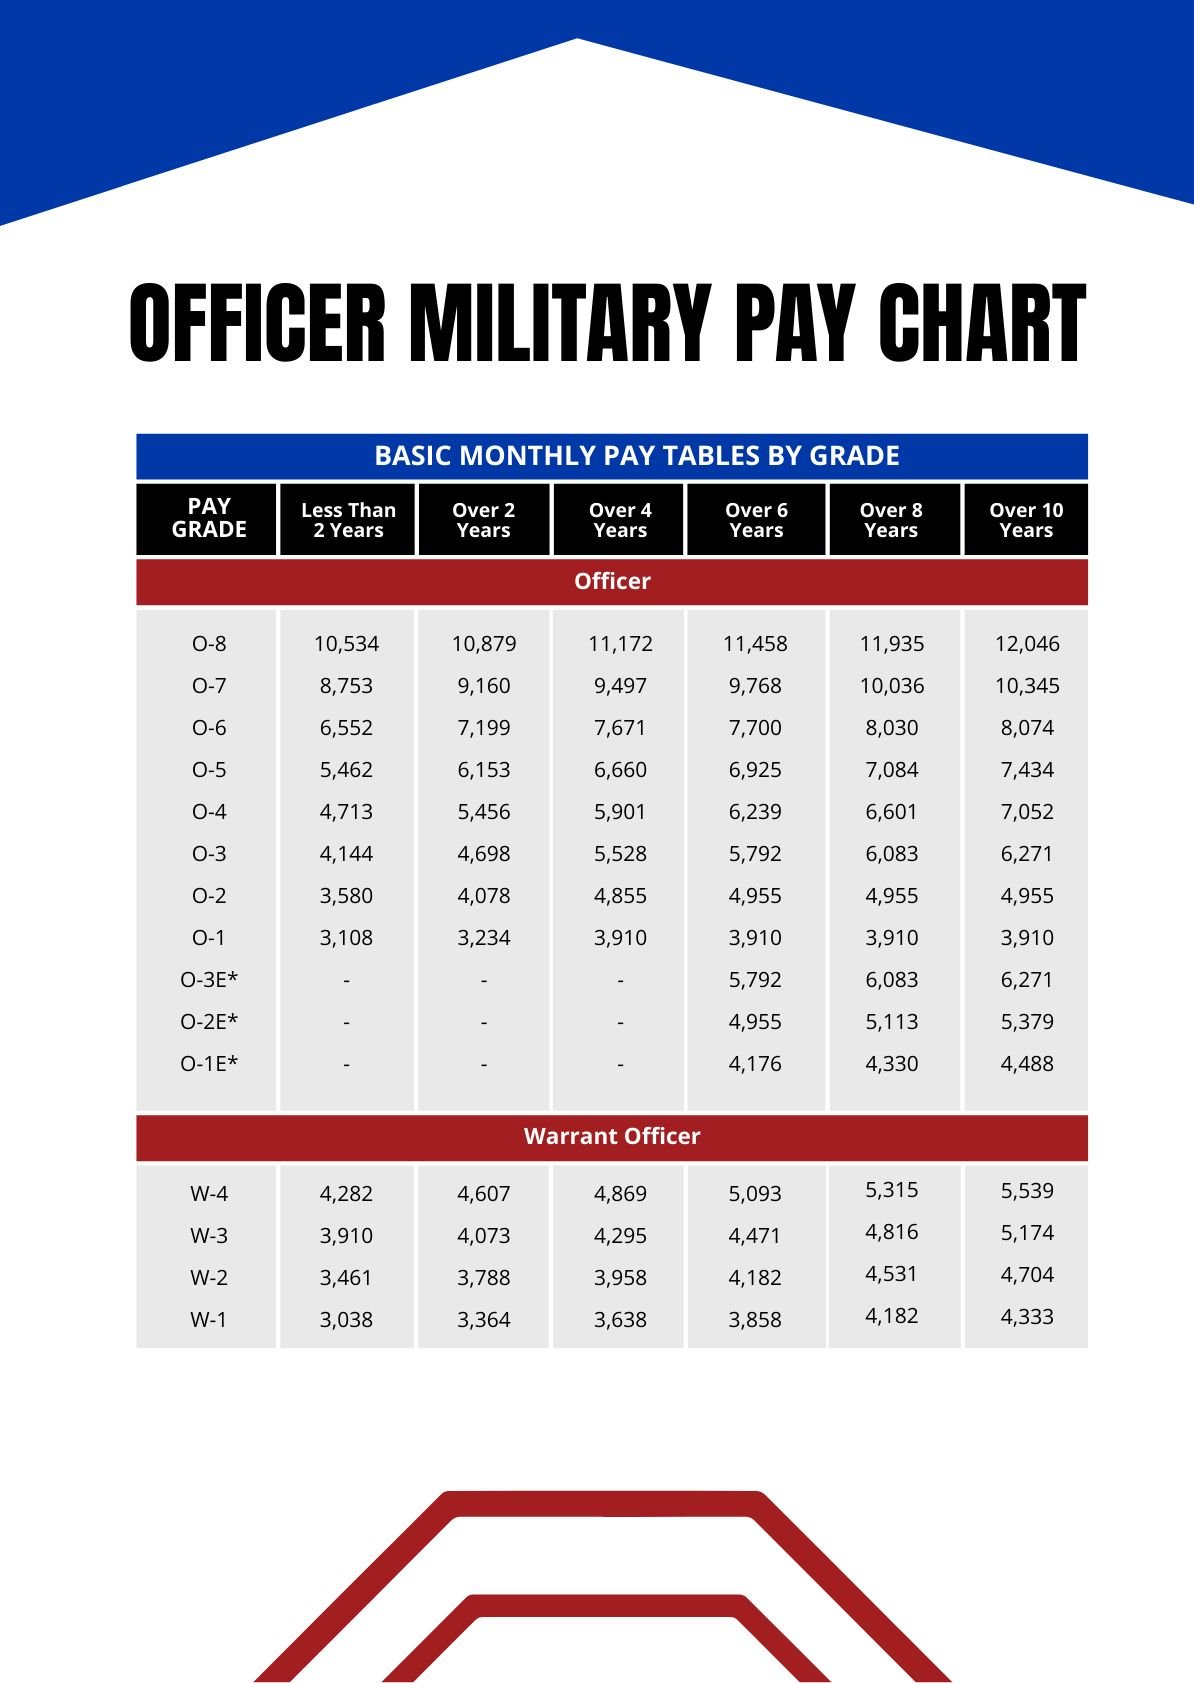 Free Current Military Pay Chart Download in PDF